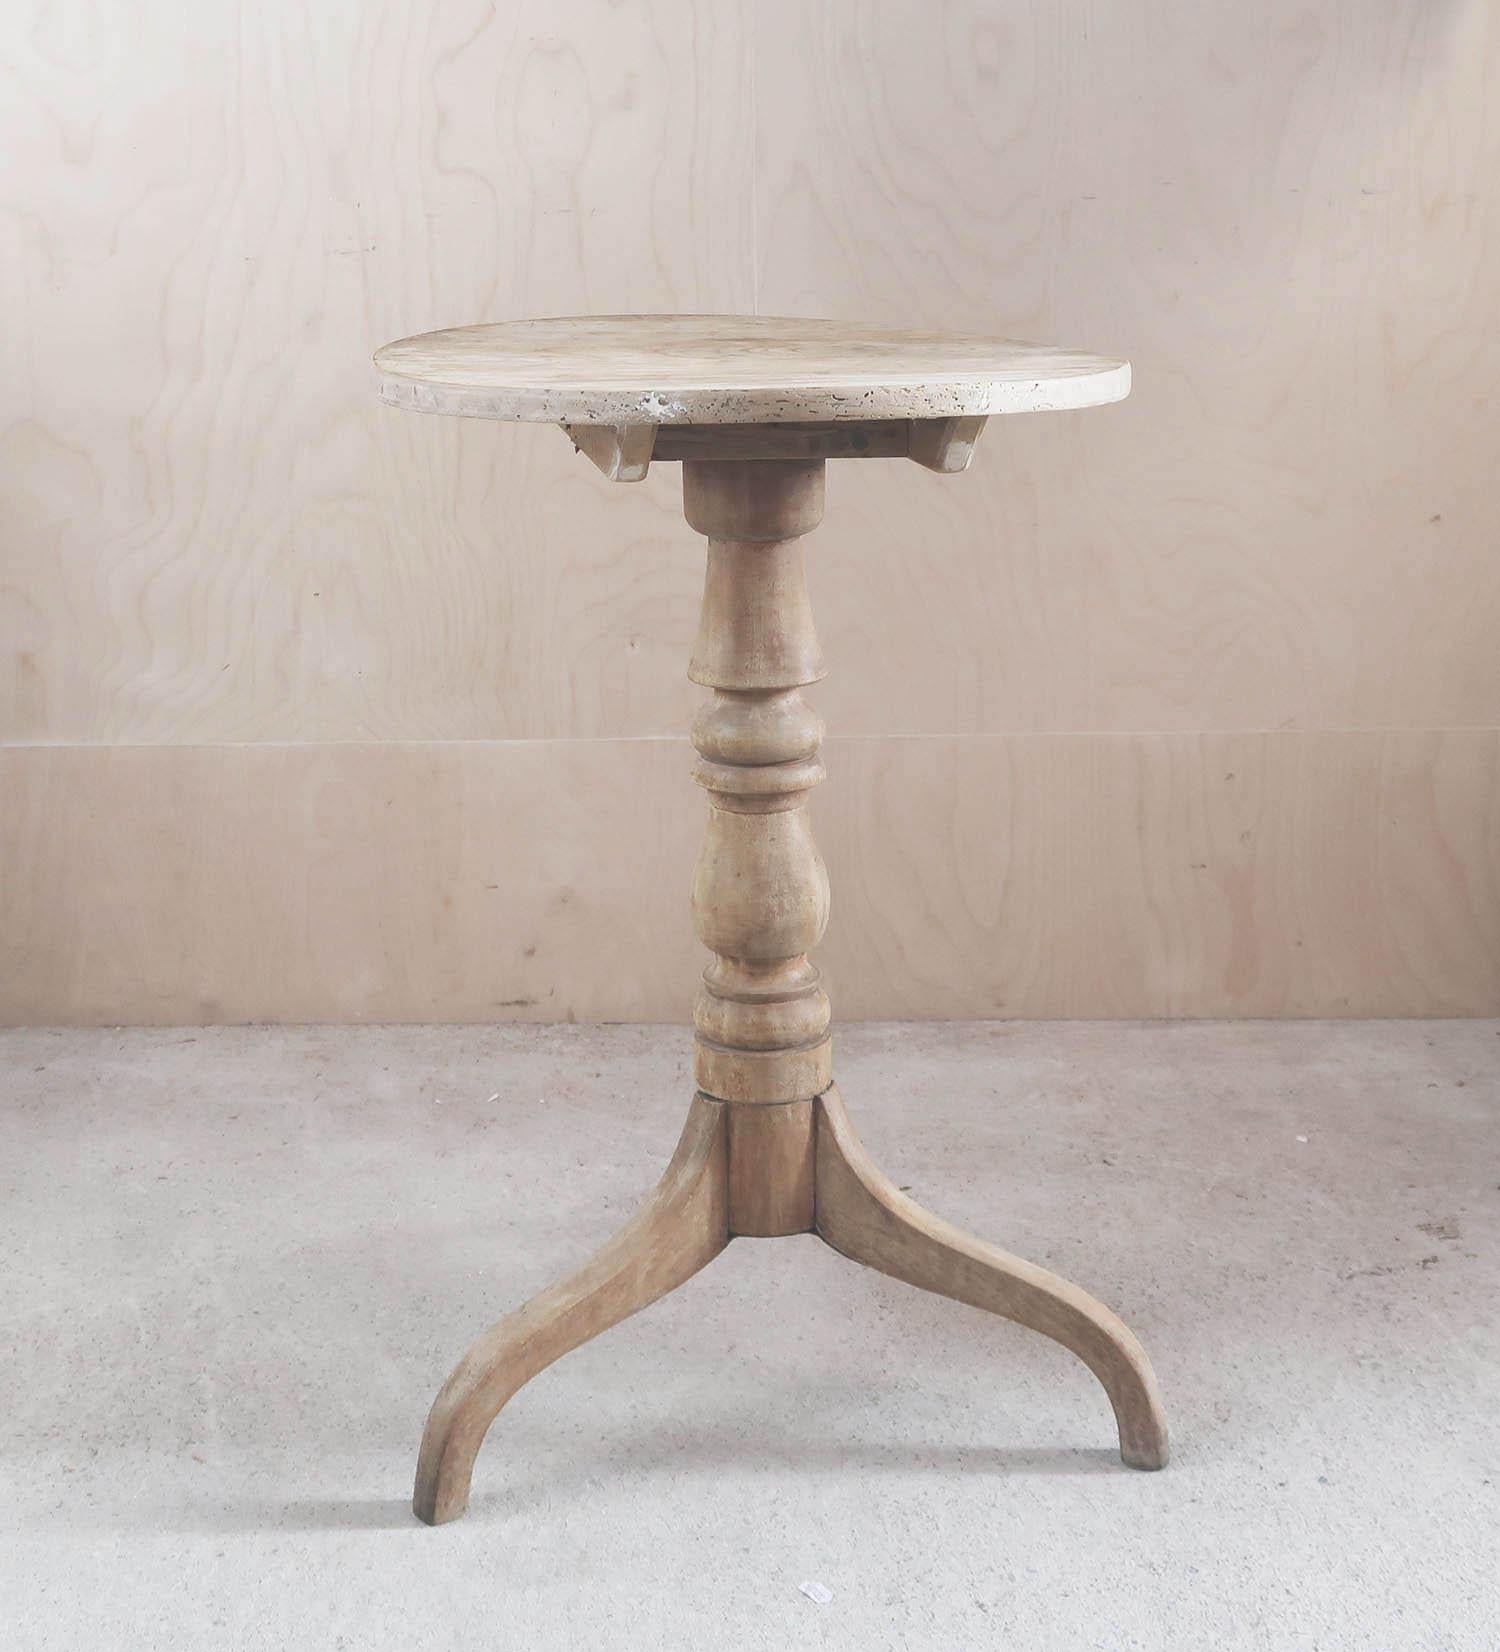 Fabulous small round Georgian table. Made from bleached elm

Nicely figured top

I particularly like its simplicity and the shape of the legs 

I have chosen not to lacquer or wax the table.

The top is slightly undulating / wavy commensurate with